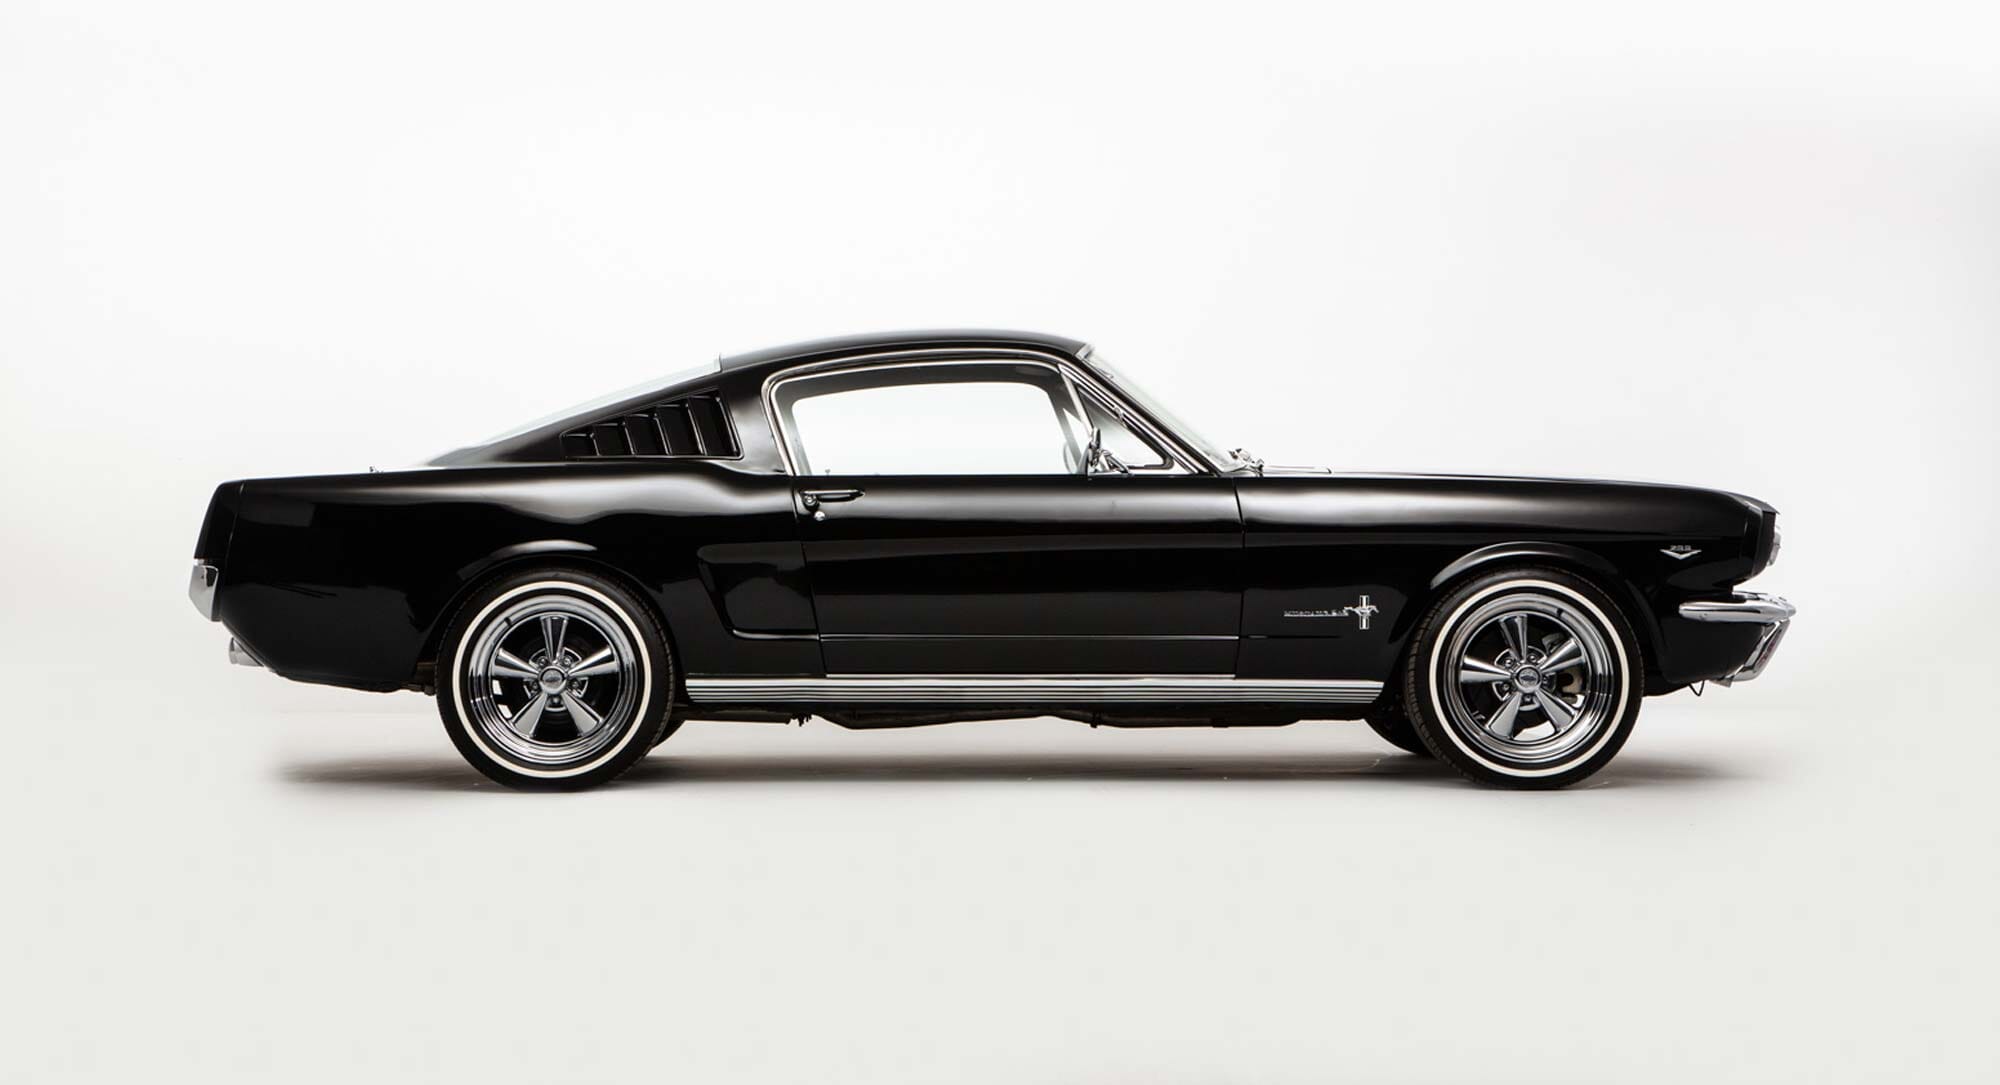 Mustang Means Freedom': Why Ford Is Saving an American Icon - The